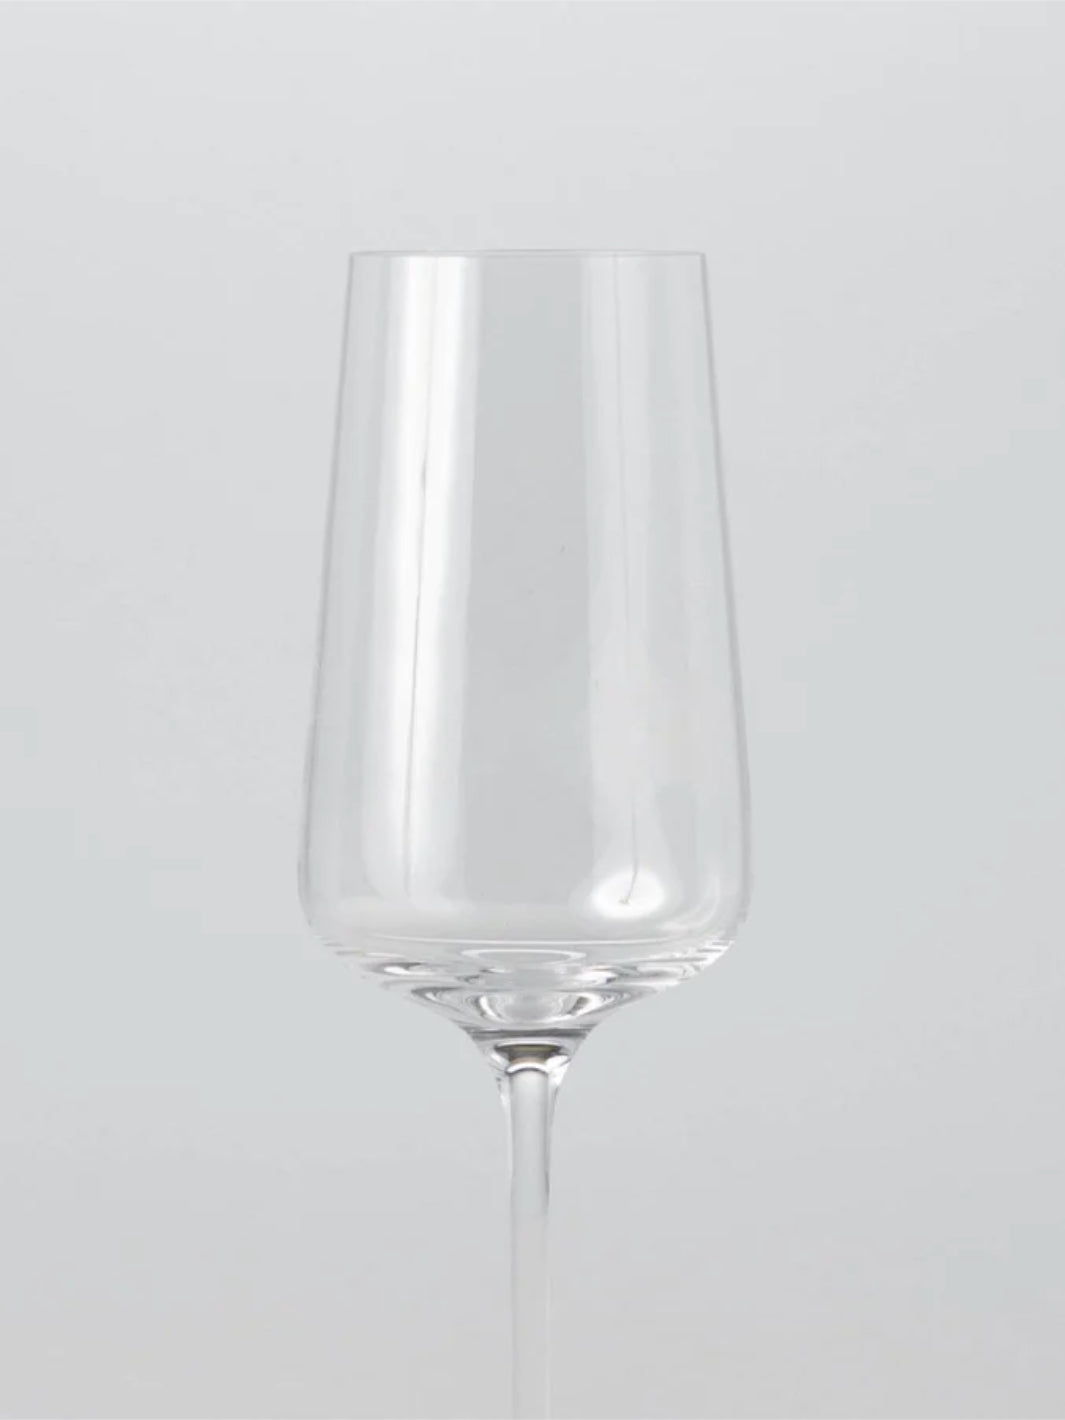 FABLE The Flute Glasses (4-Pack)